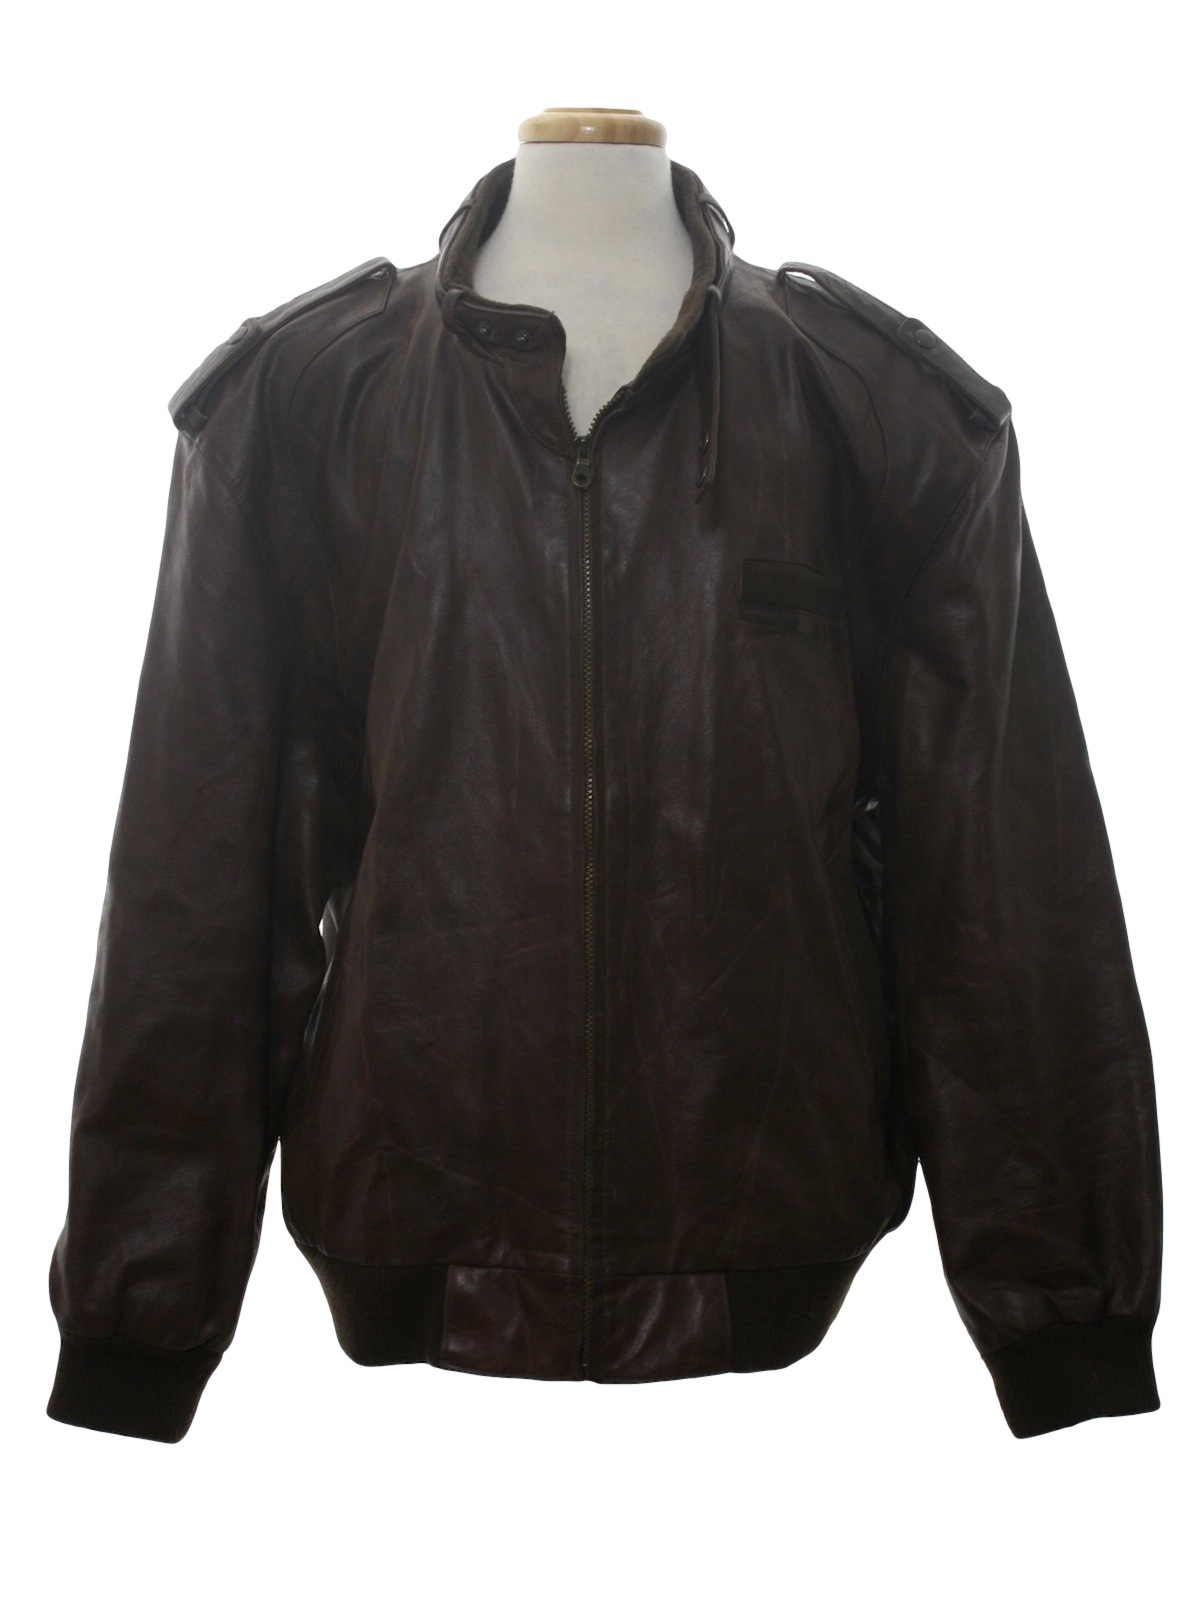 Retro 80s Leather Jacket (Members Only) : 80s Style made in 90s ...